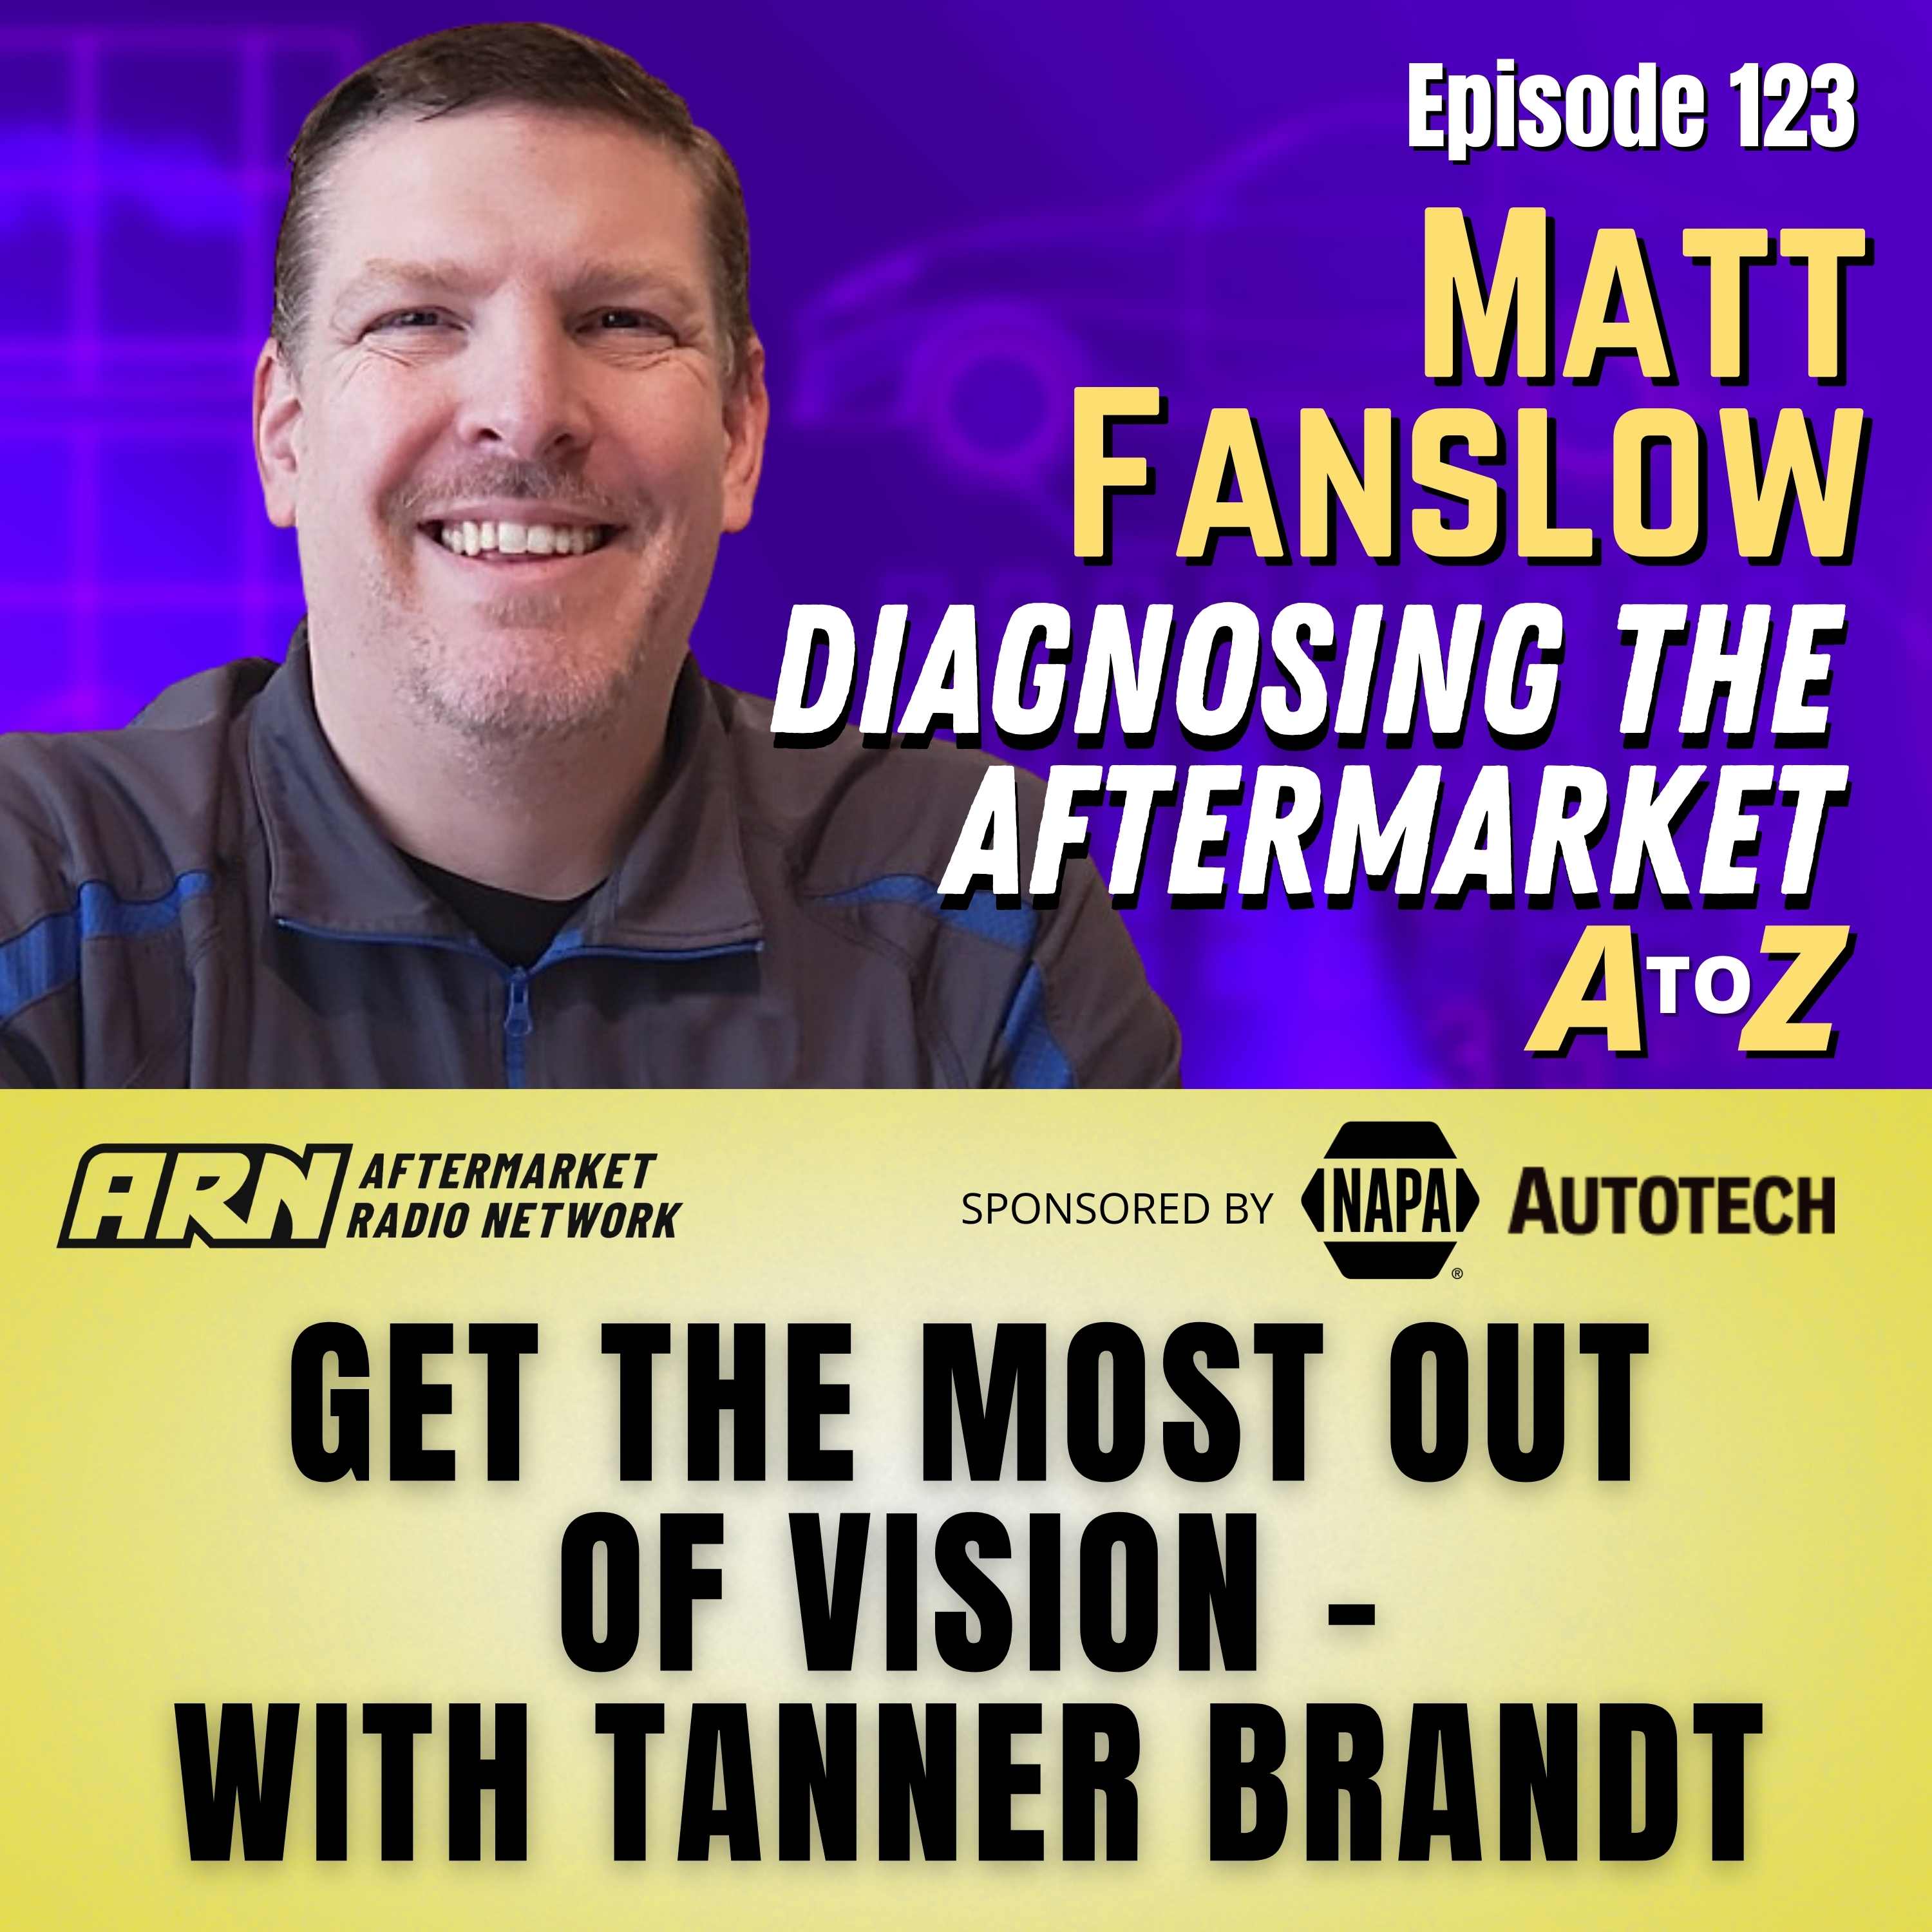 Get the Most Out of Vision Hi-Tech Training and Expo - With Tanner Brandt [E123] - Diagnosing the Aftermarket A to Z